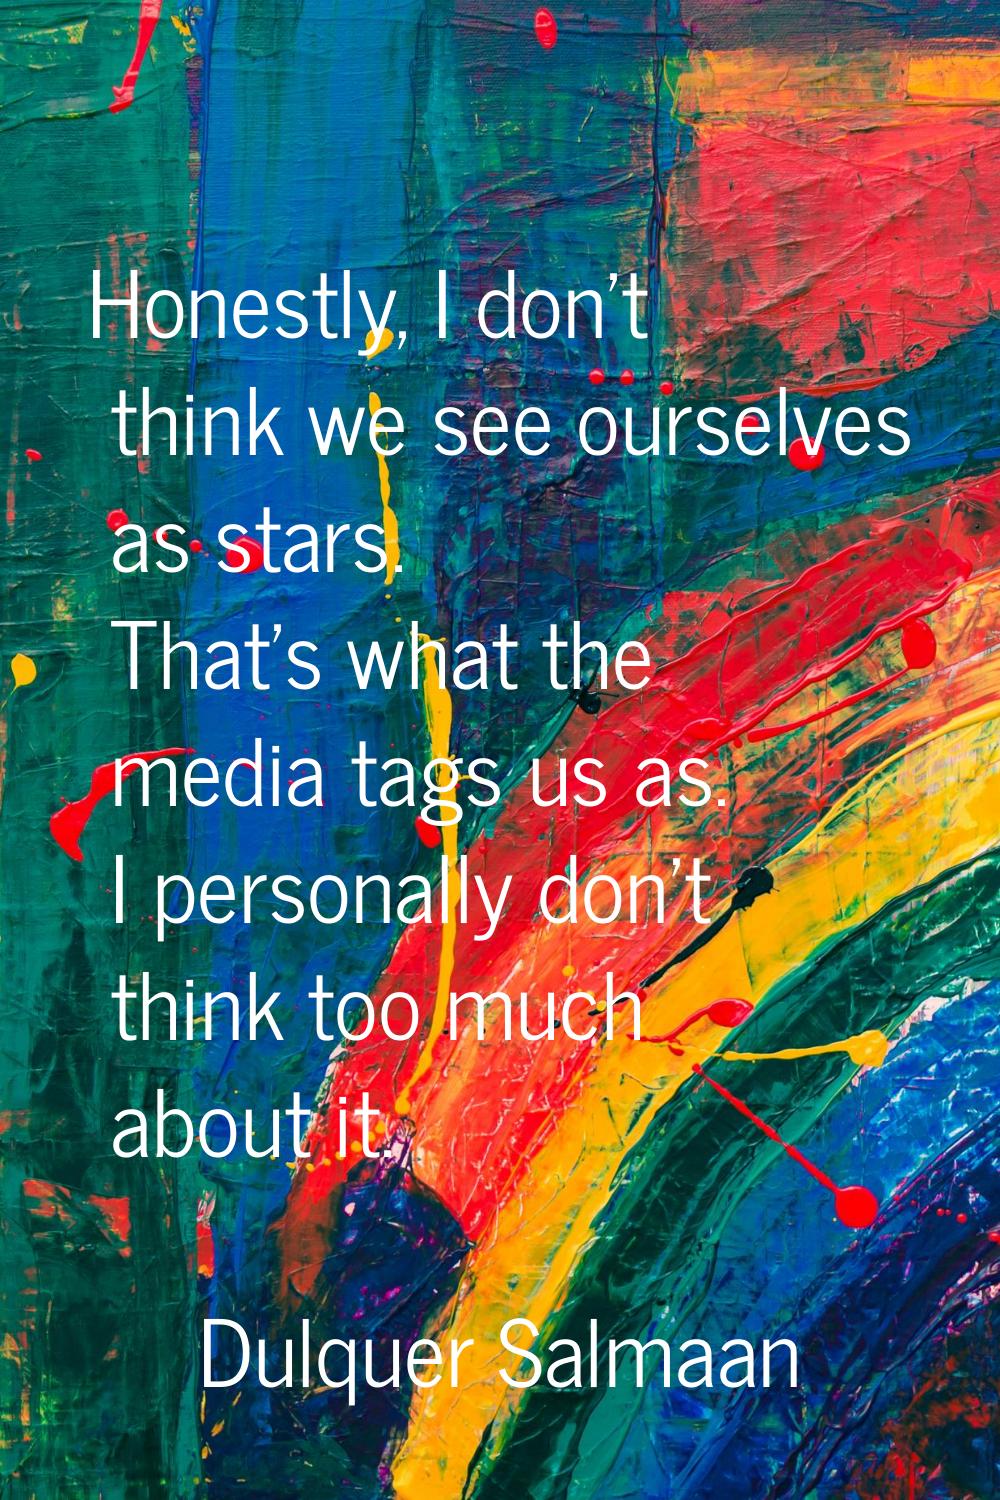 Honestly, I don't think we see ourselves as stars. That's what the media tags us as. I personally d